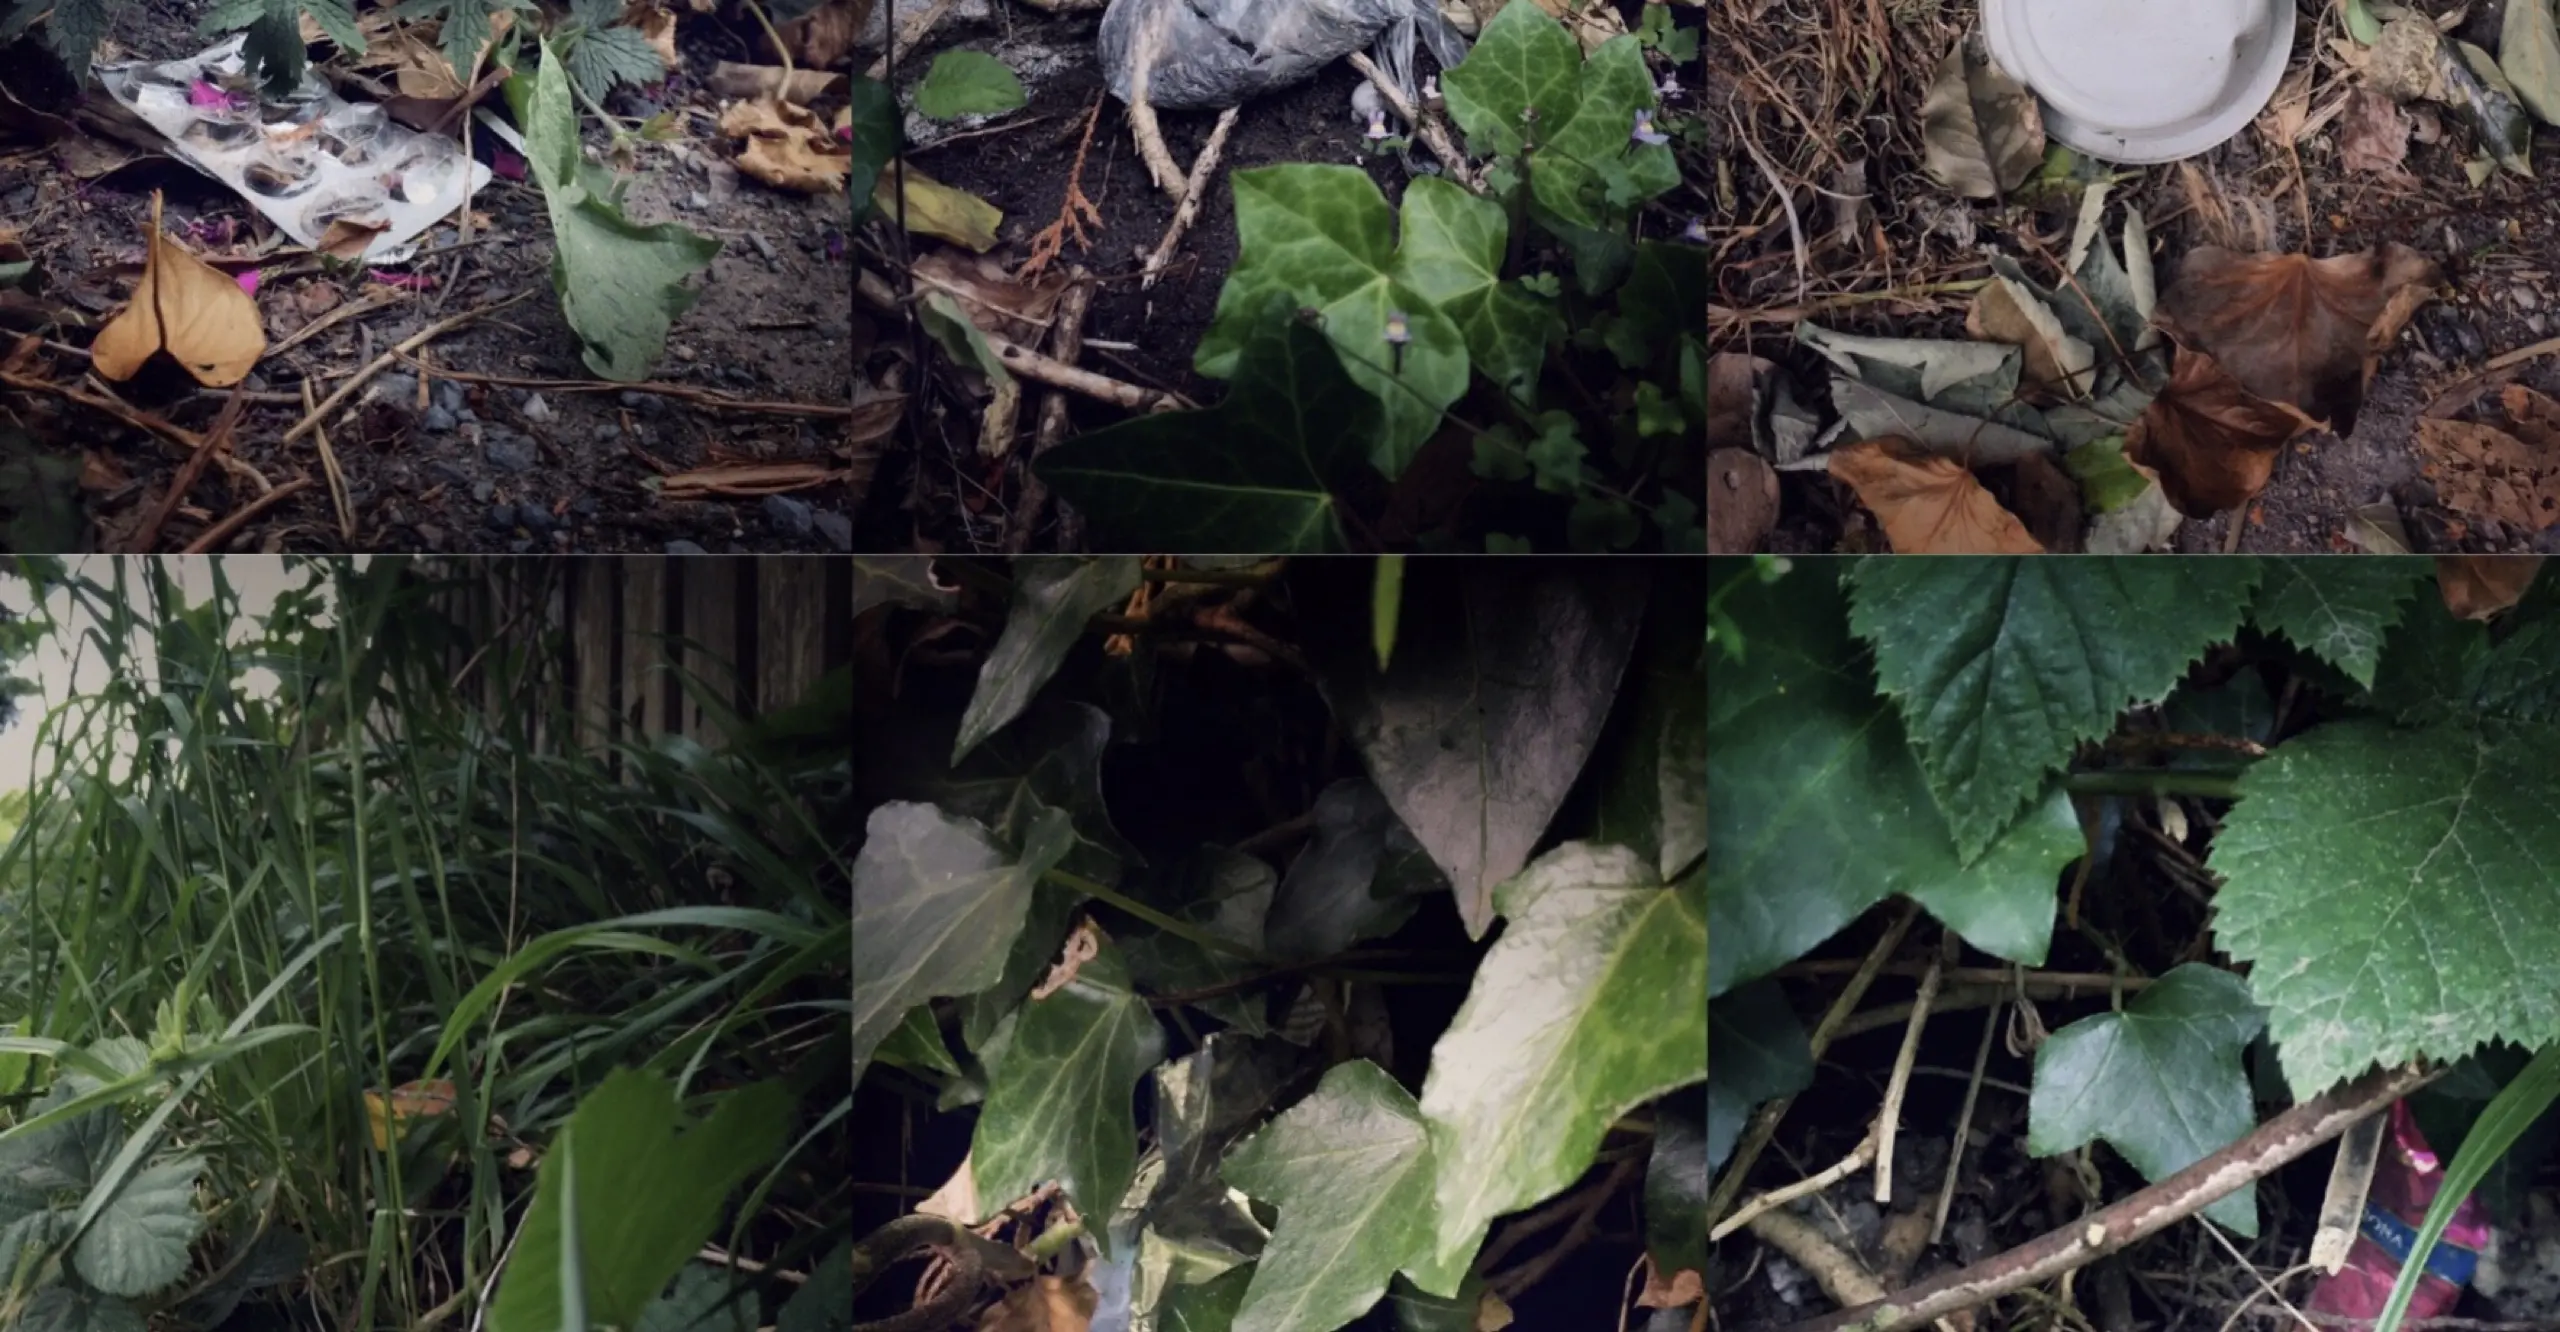 Collage of six images featuring a close up of the leaves and plants growing from the ground with various pieces of litter